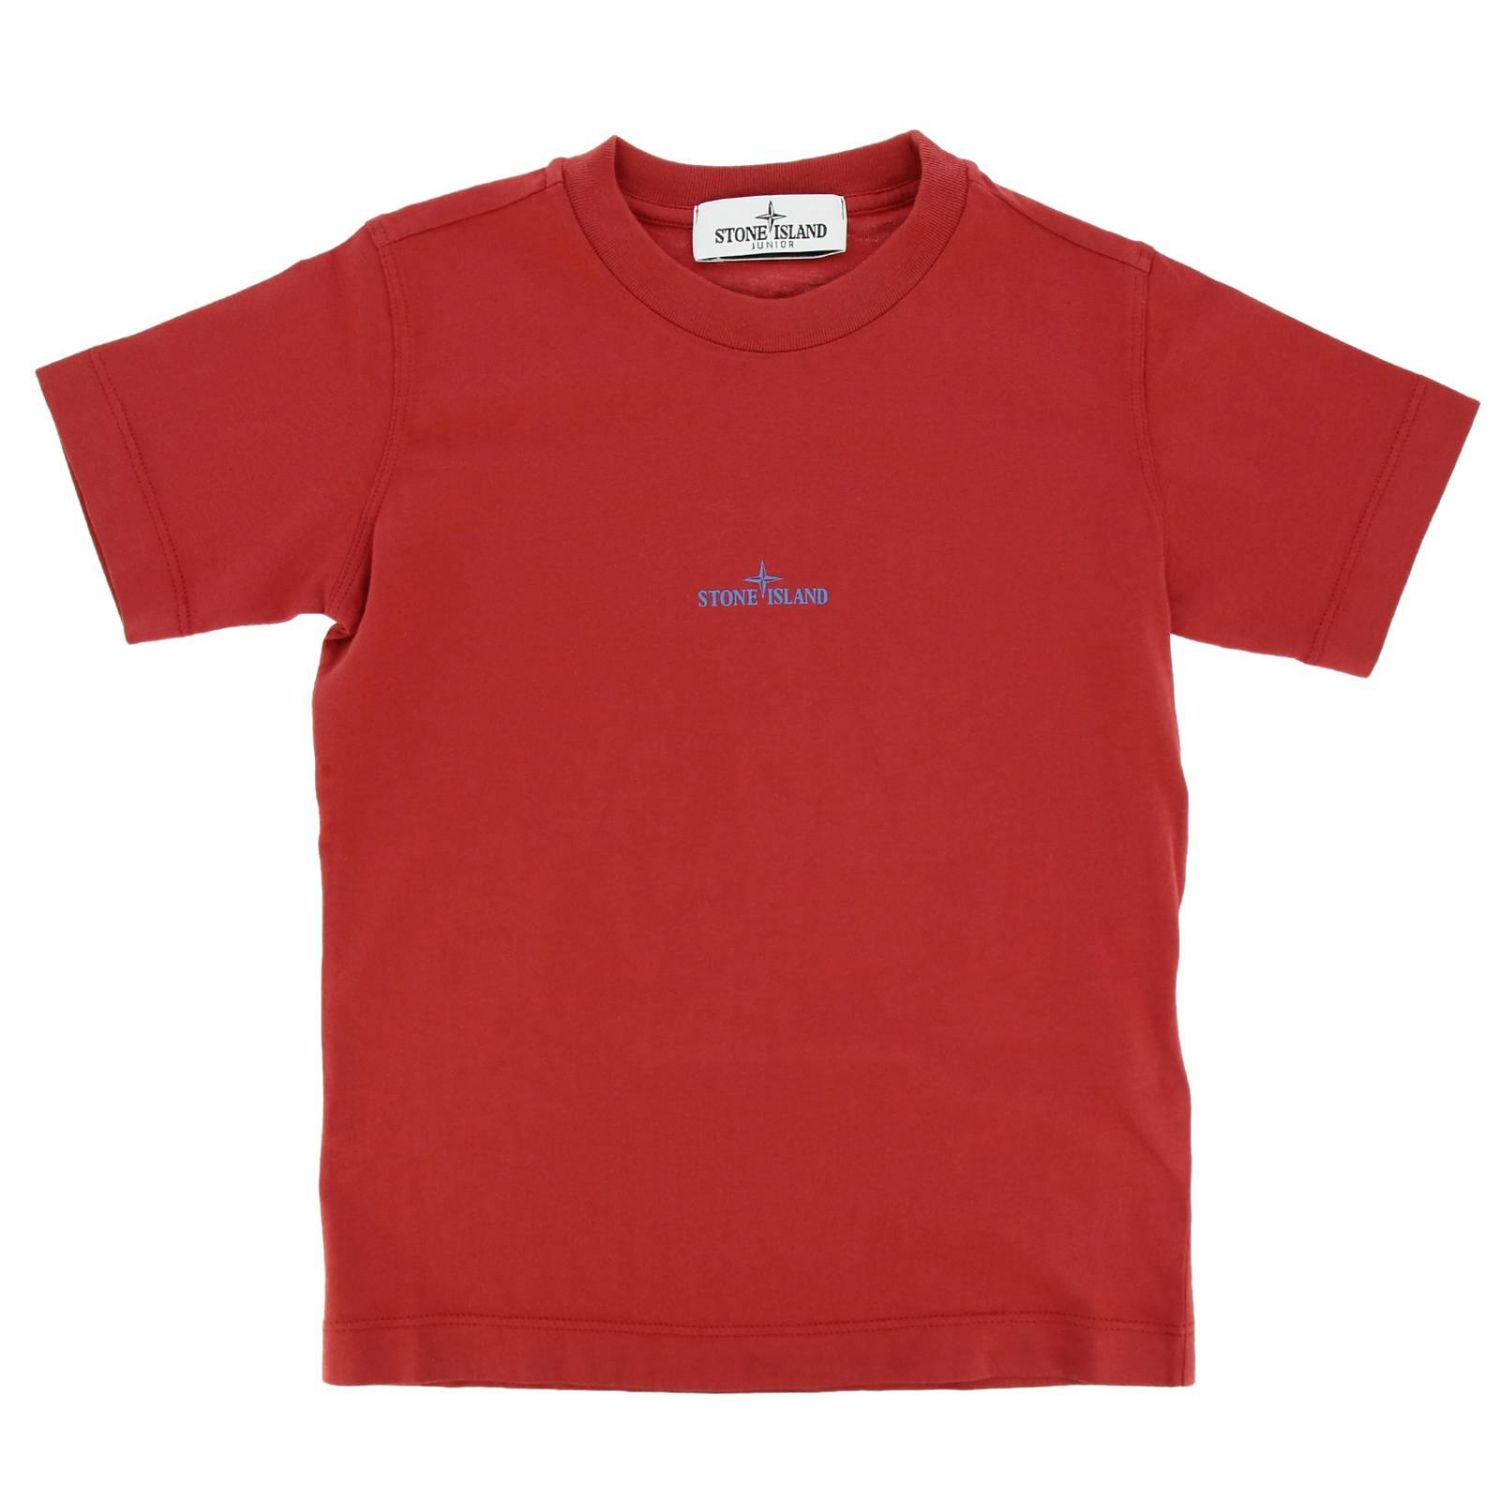 Stone Island Junior Outlet: T-shirt kids Stone Island - Red | T-Shirt ...